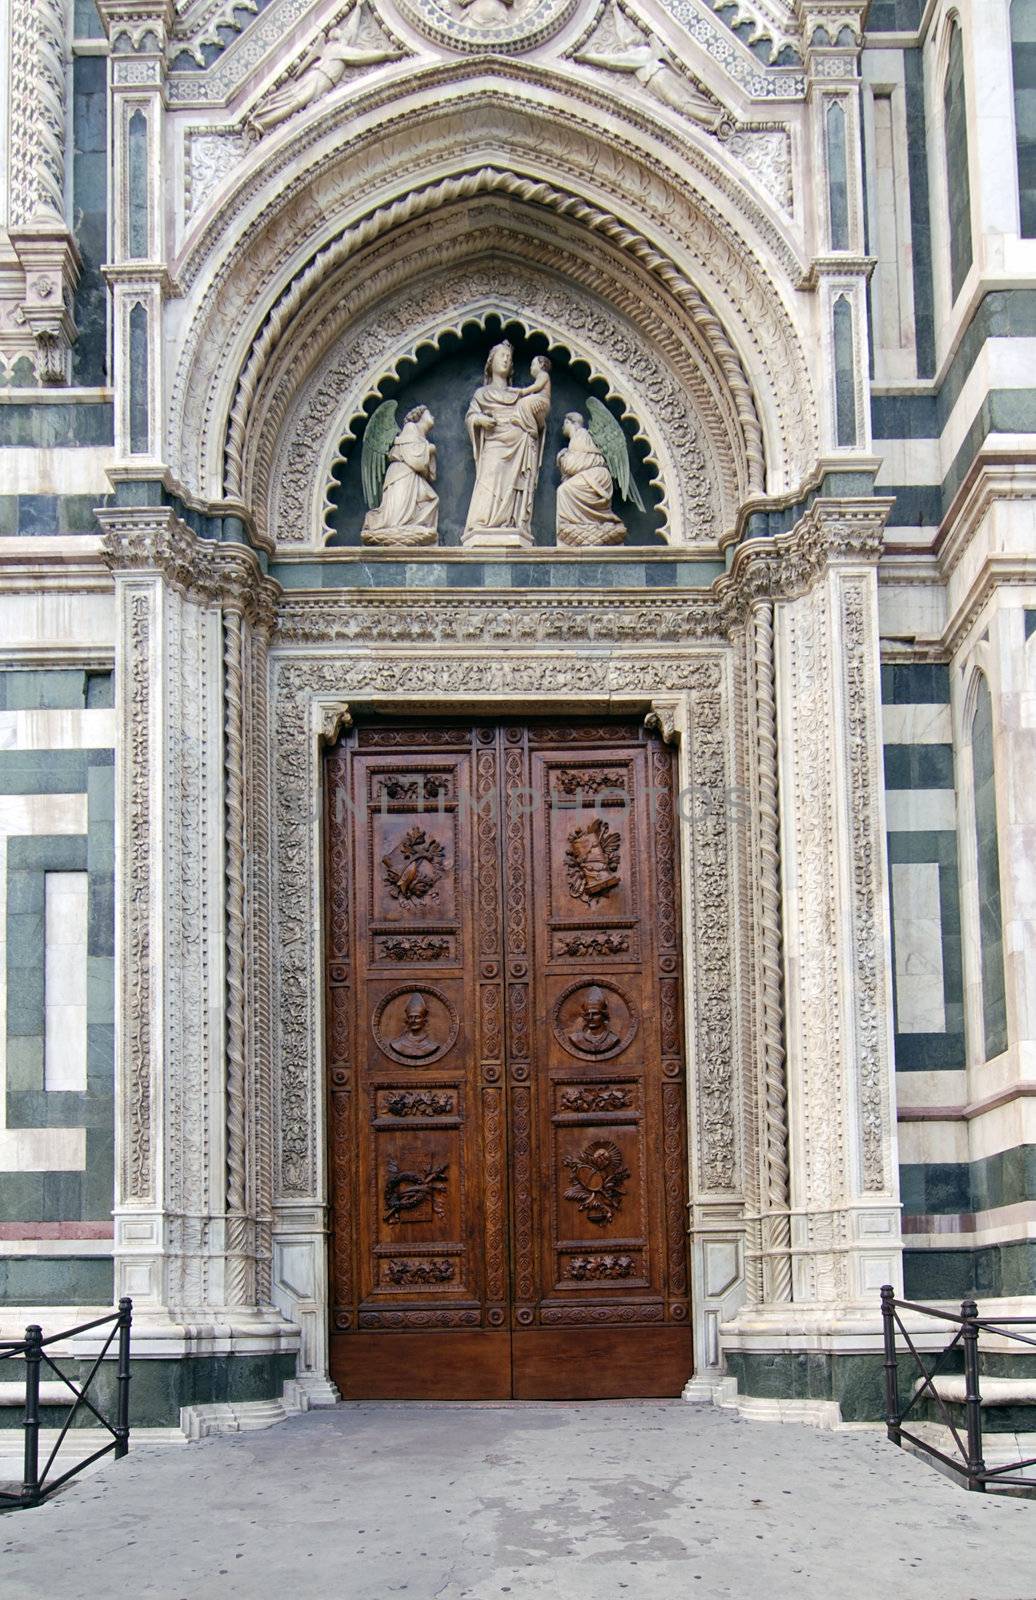 Beautiful renaissance wooden door of the cathedral Santa Maria del Fiore in Florence, Italy